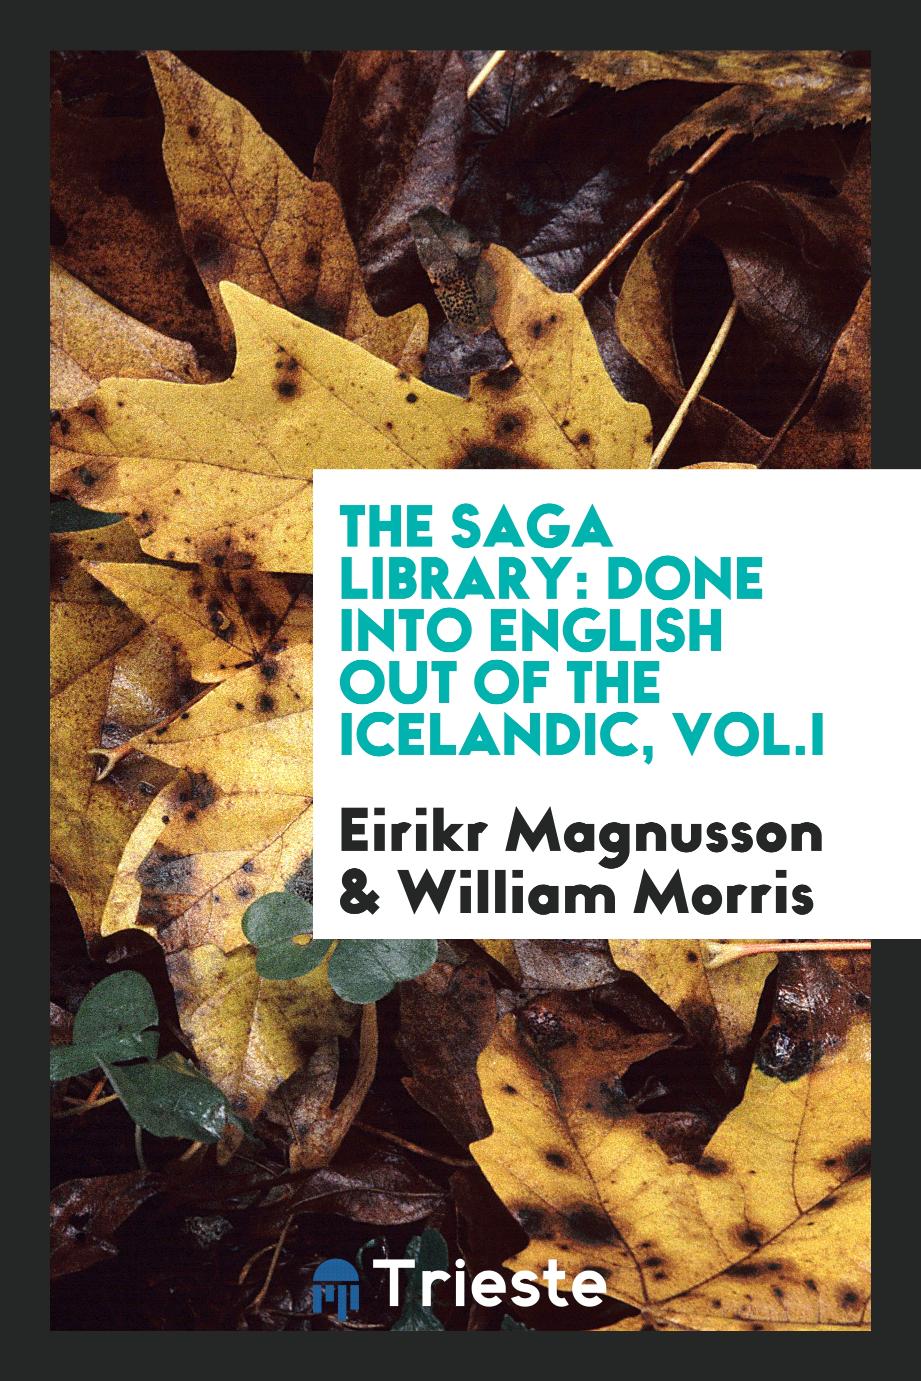 The Saga library: done into English out of the Icelandic, Vol.I